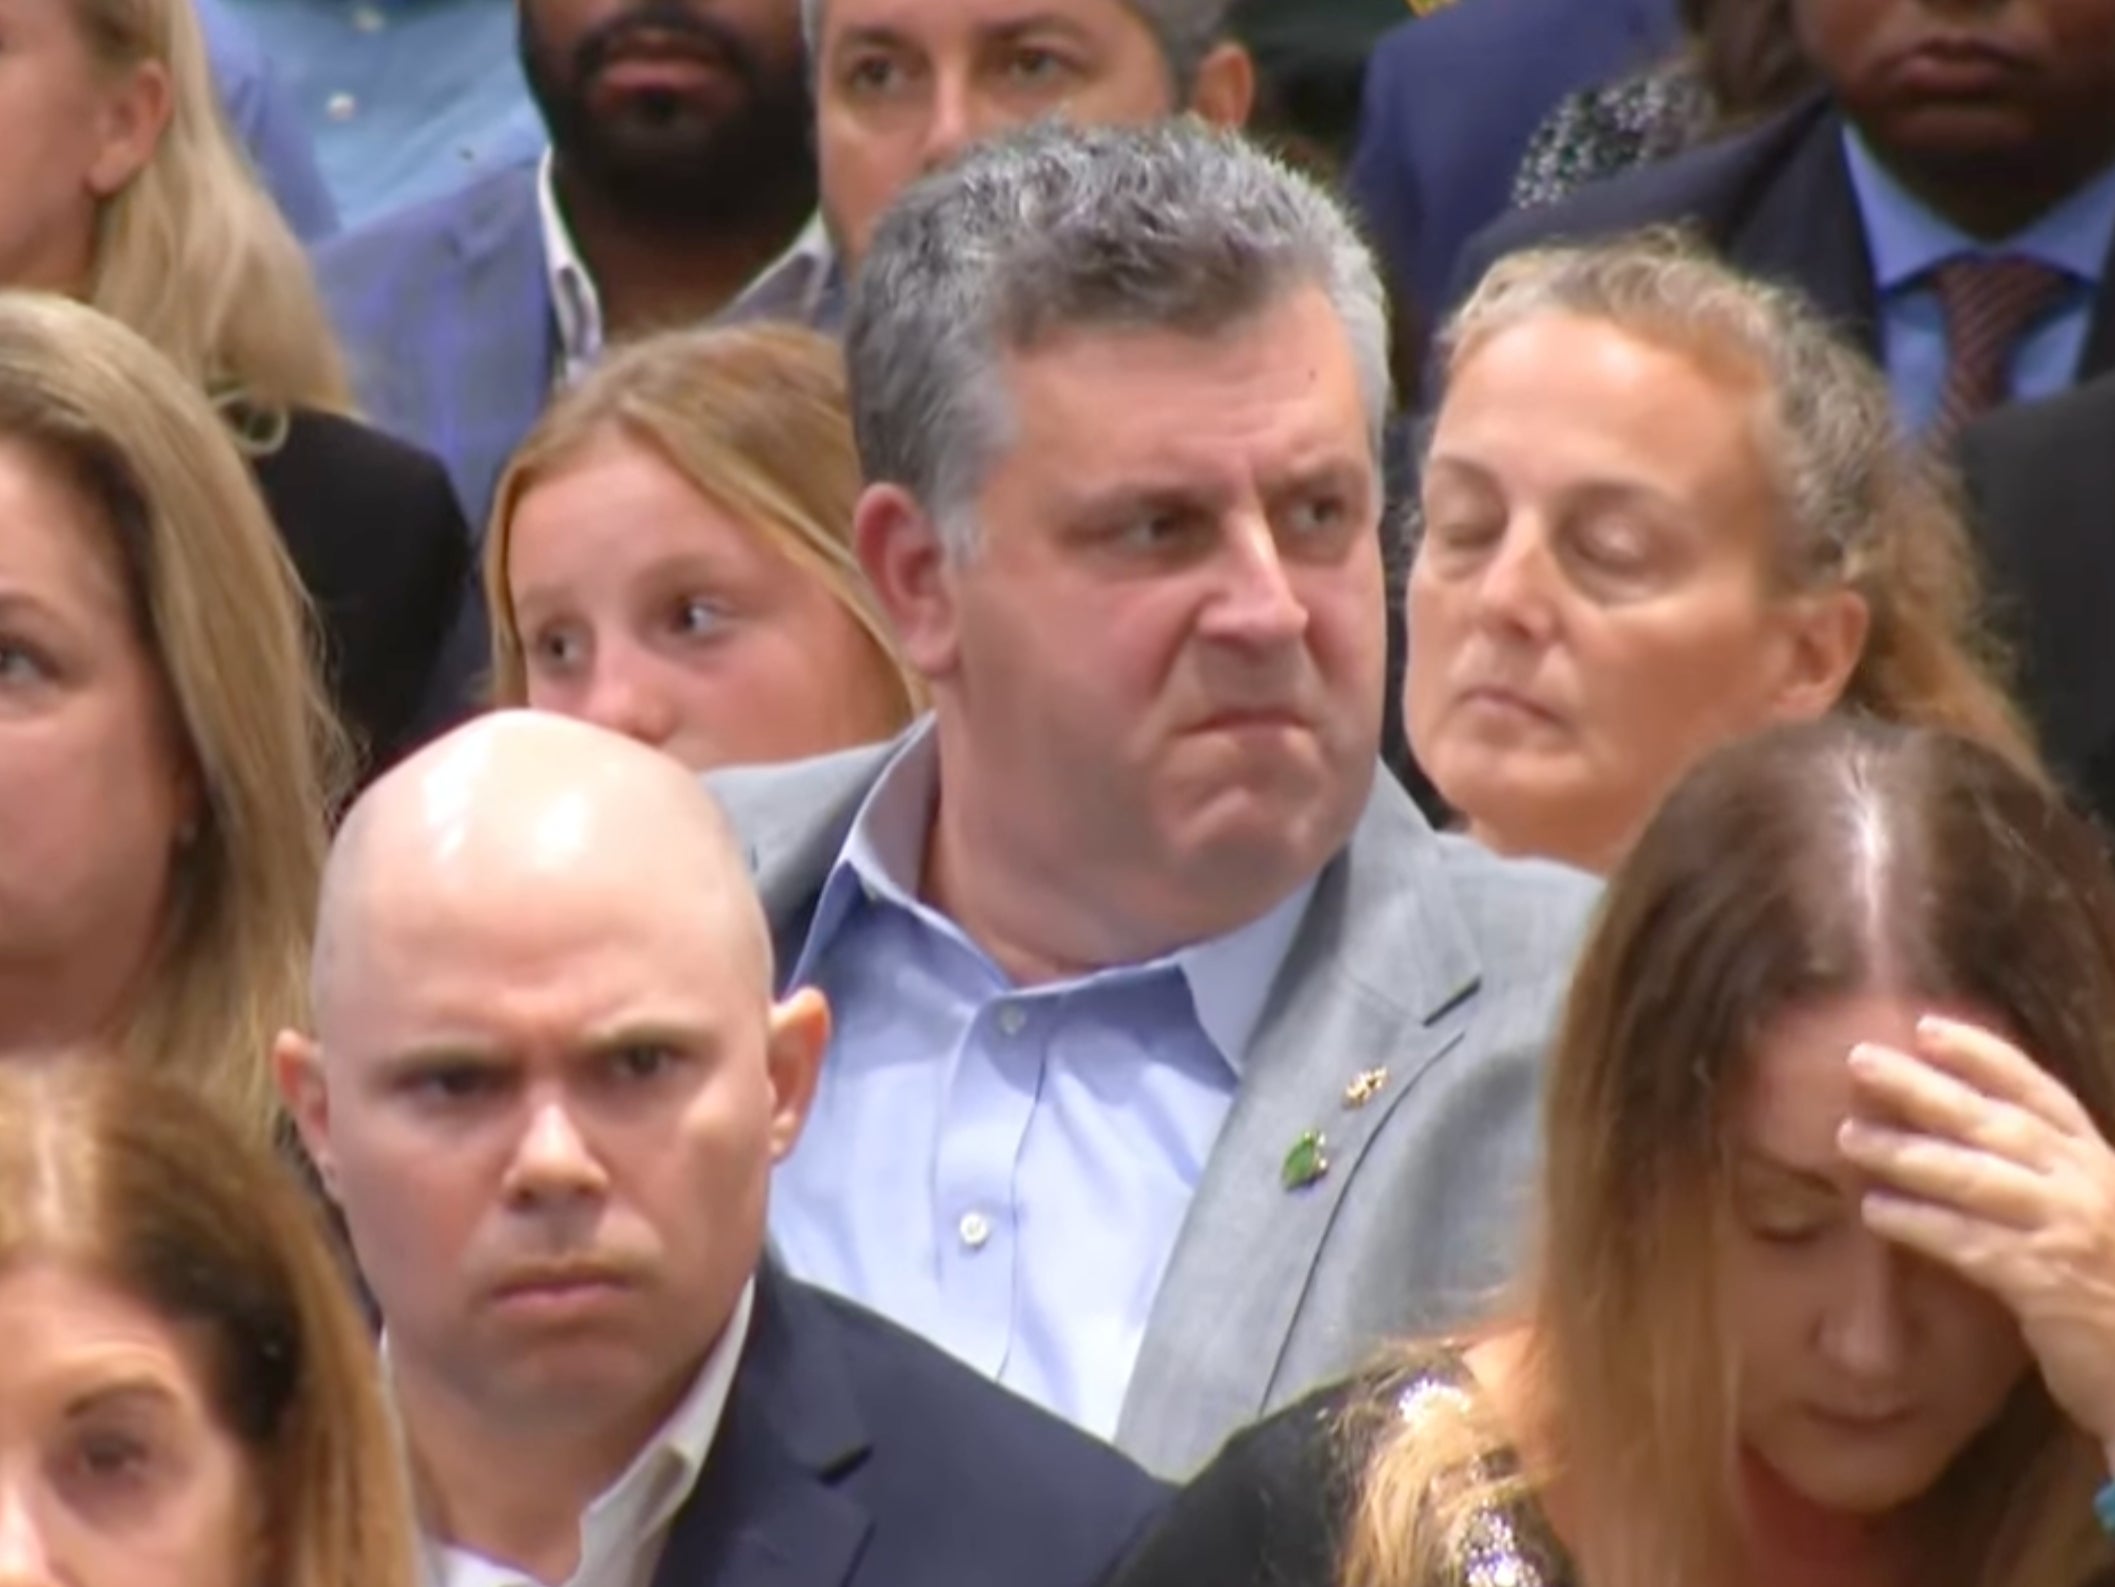 Family members of victims could be seen shaking their heads at the verdict readout for Parkland school shooter Nikolas Cruz